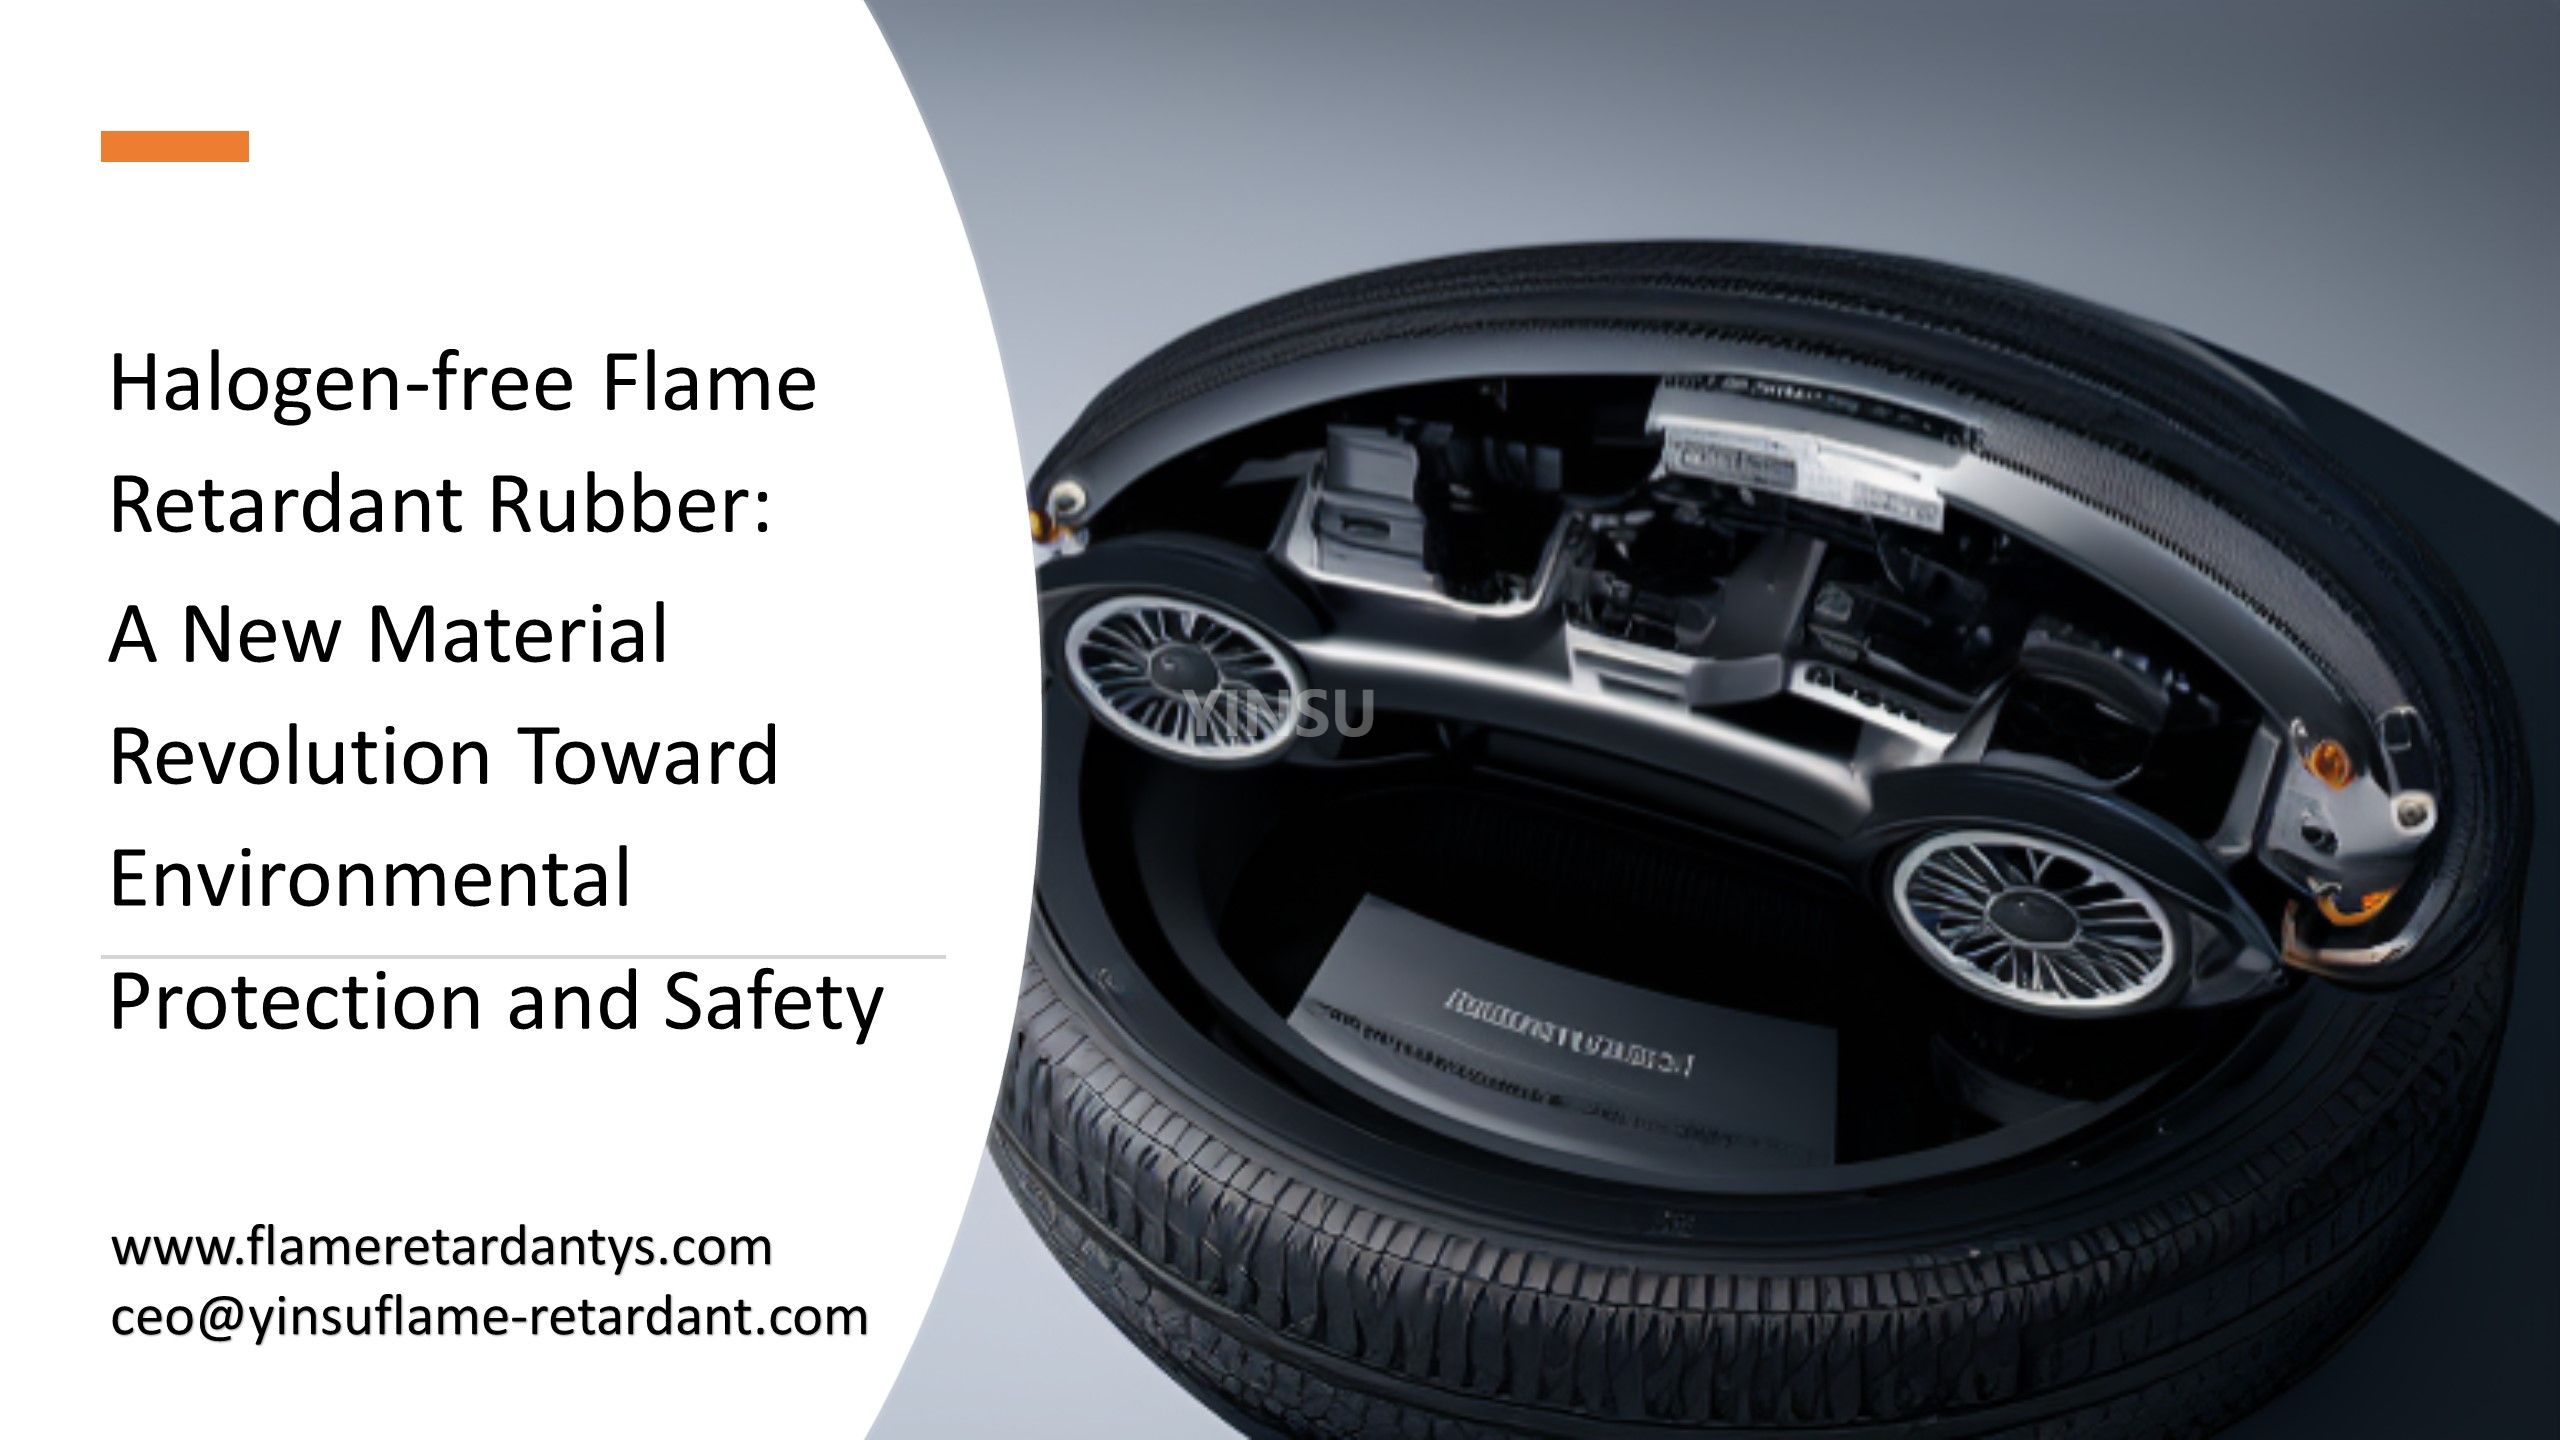 Halogen-free Flame Retardant Rubber: A New Material Revolution Toward Environmental Protection And Safety